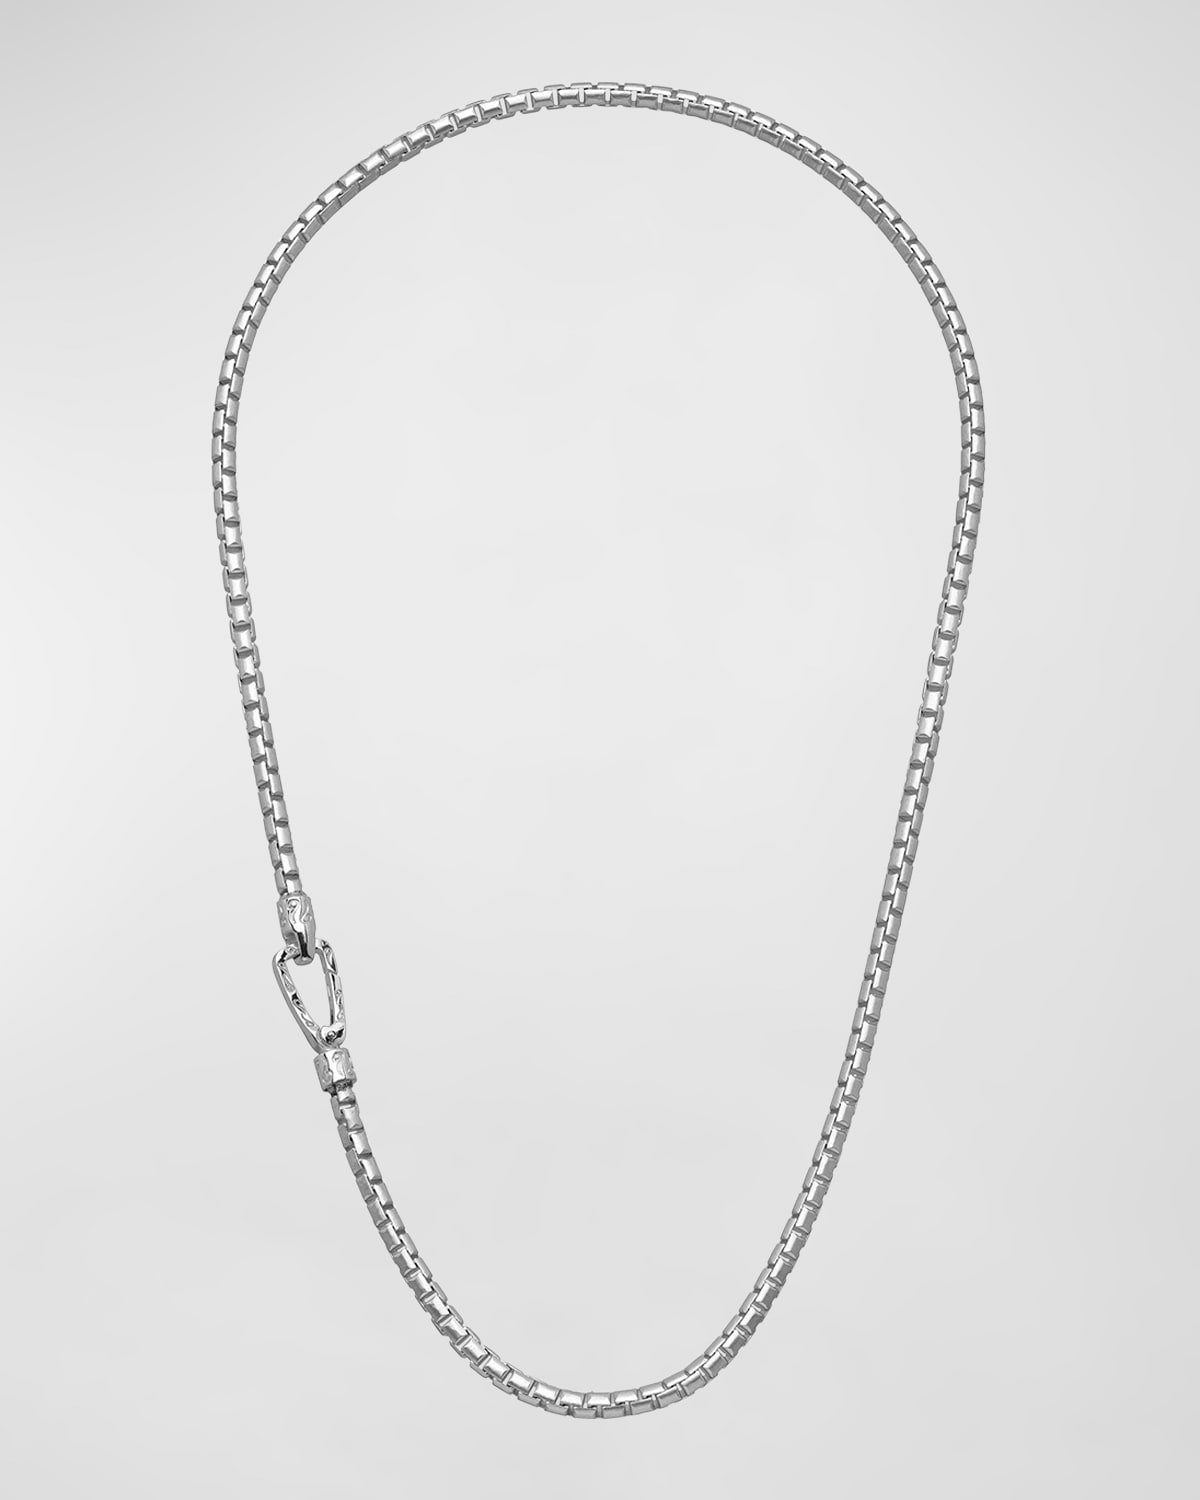 Marco Dal Maso Carved Tubular White Polished Silver Necklace with Matte Chain and Polished Clasp, 22"L